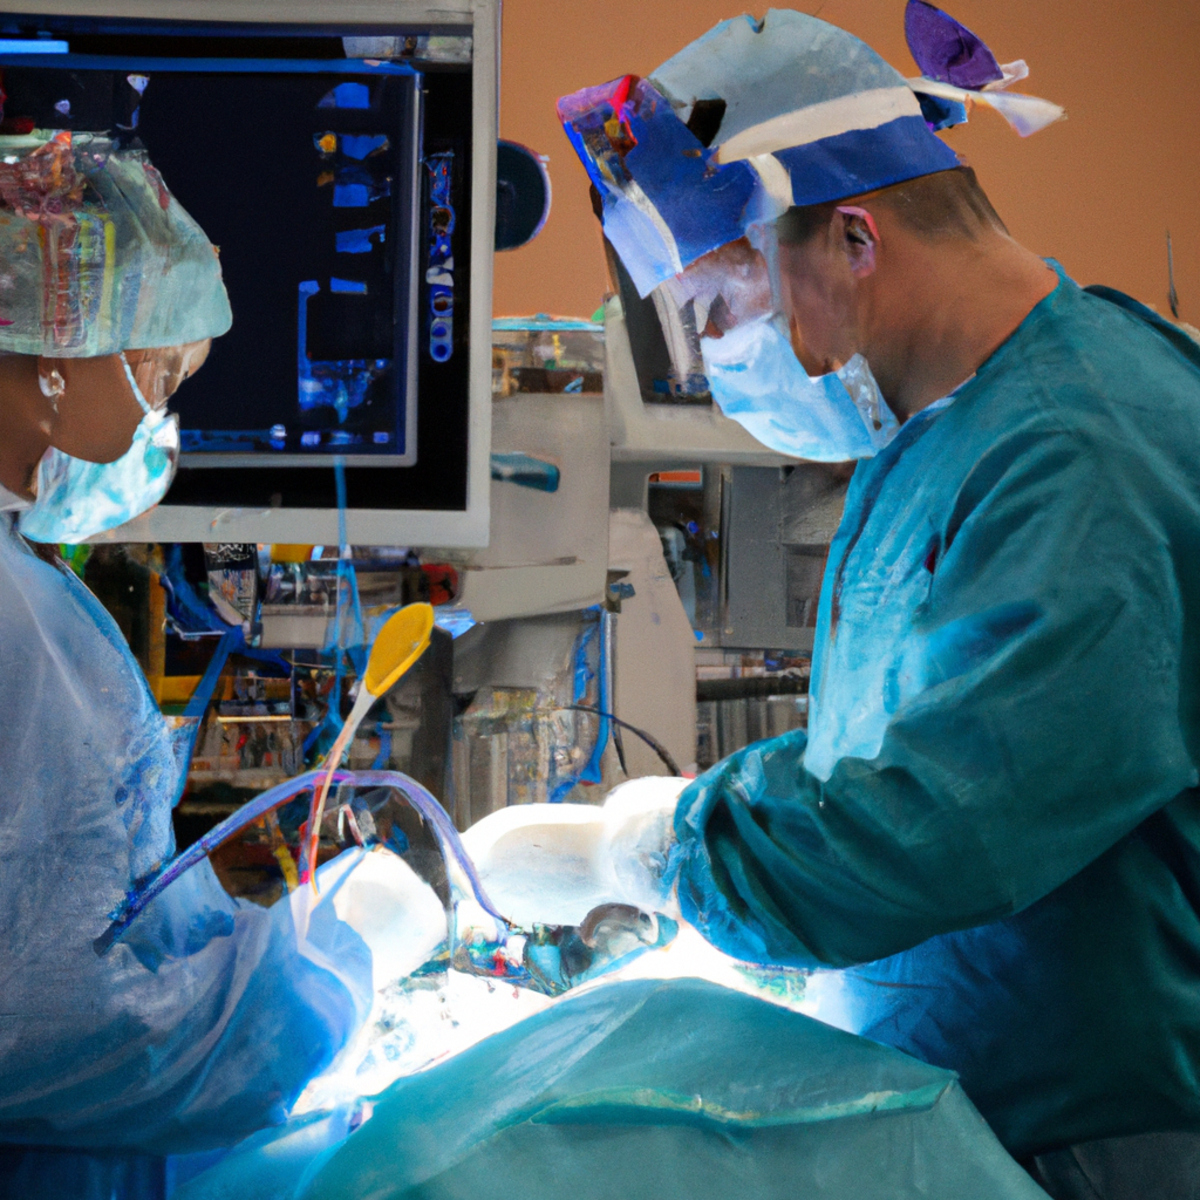 Skilled surgeon delicately performs liver transplant in sterile operating room, showcasing precision and expertise required for complex procedure - Progressive Familial Intrahepatic Cholestasis (PFIC)